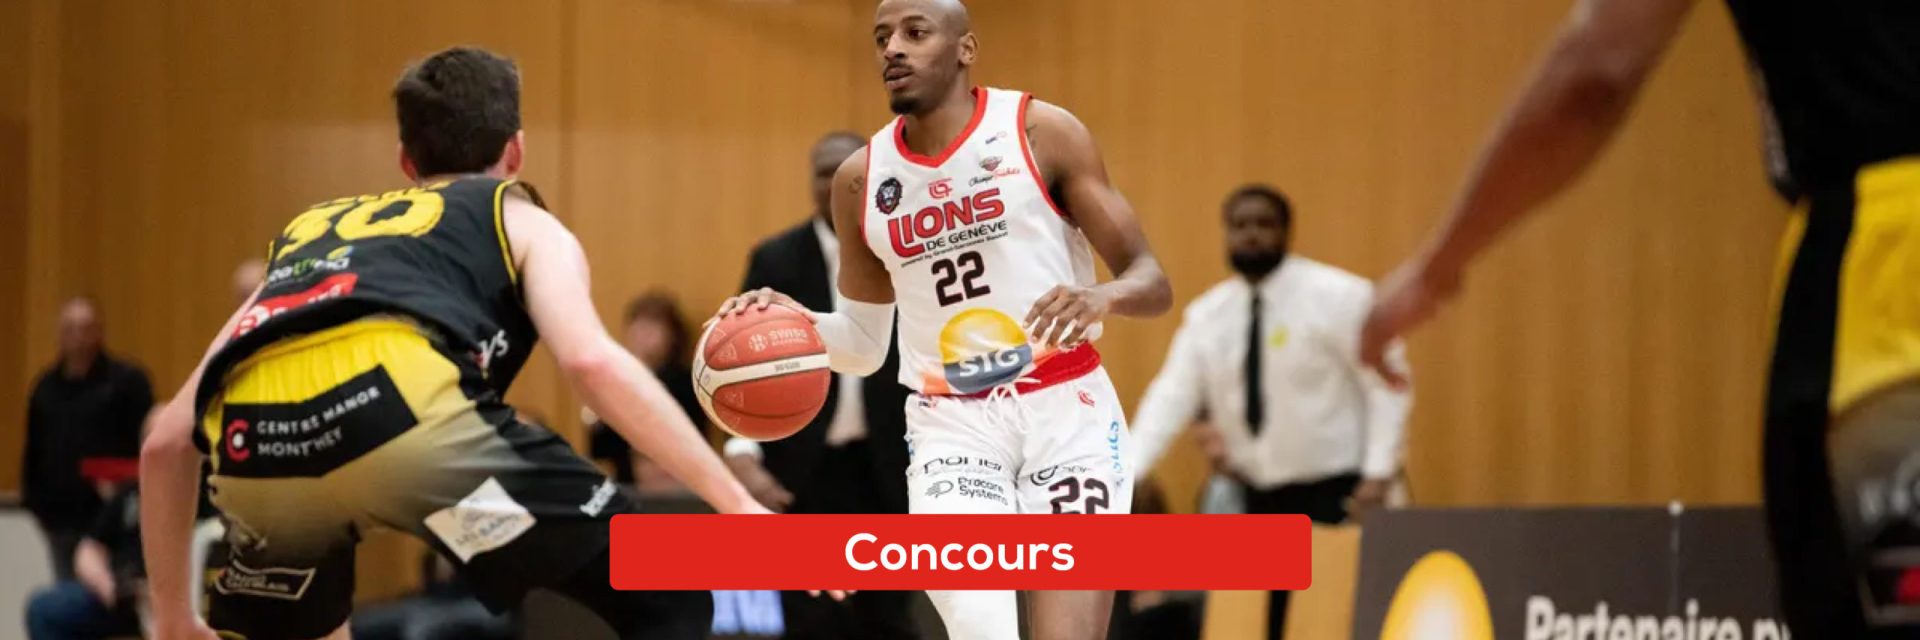 unireso-RS-concours-LIONS-22